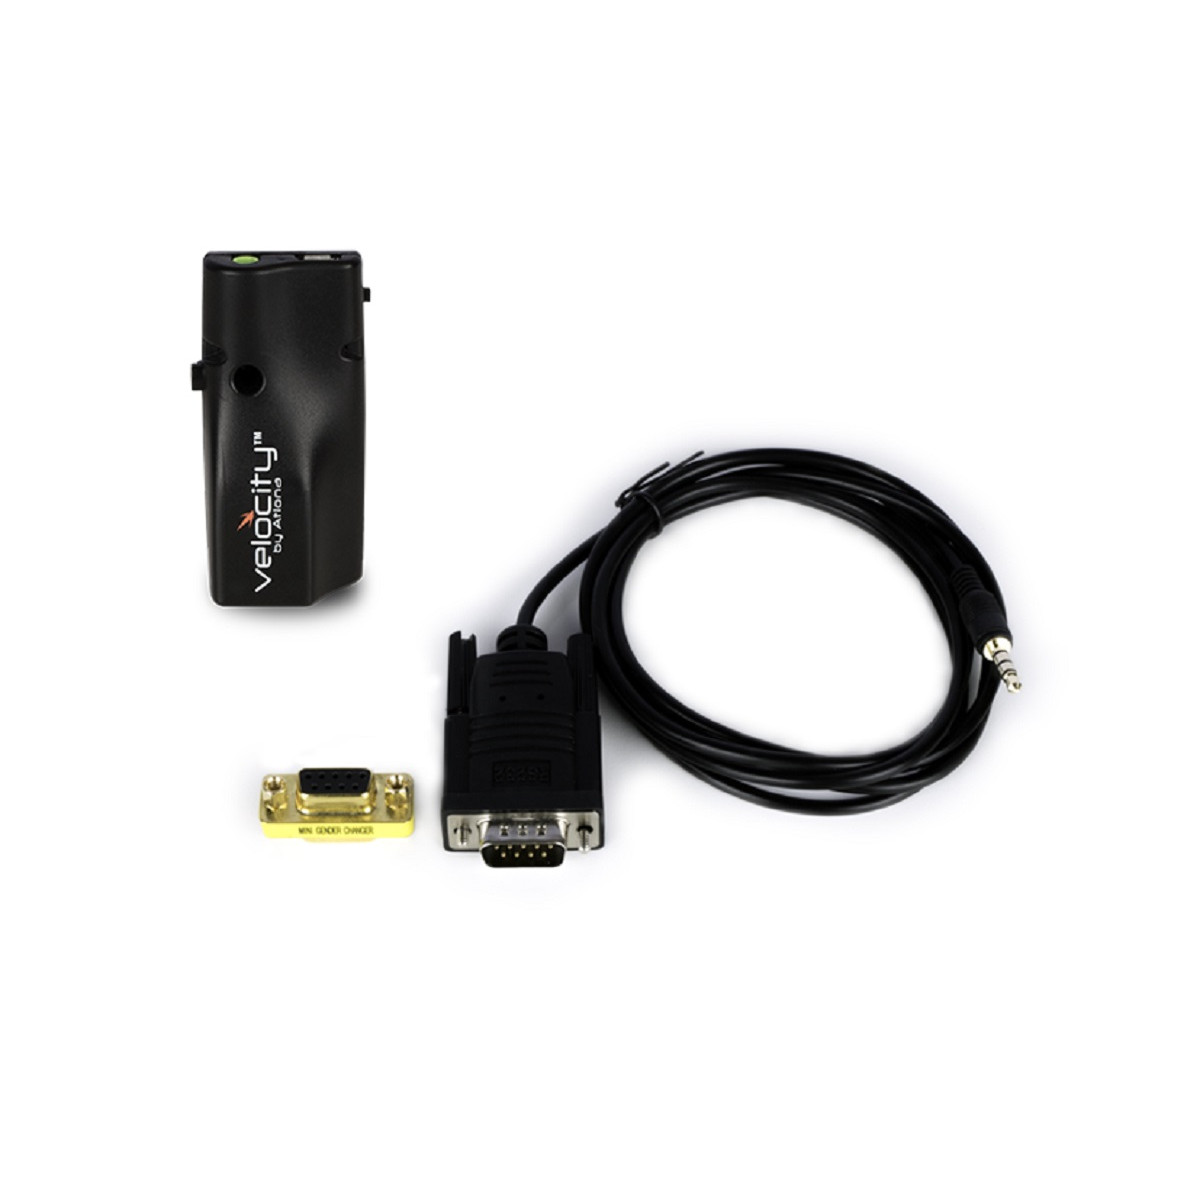 Velocity Control Kit PoE con dongle RS232.